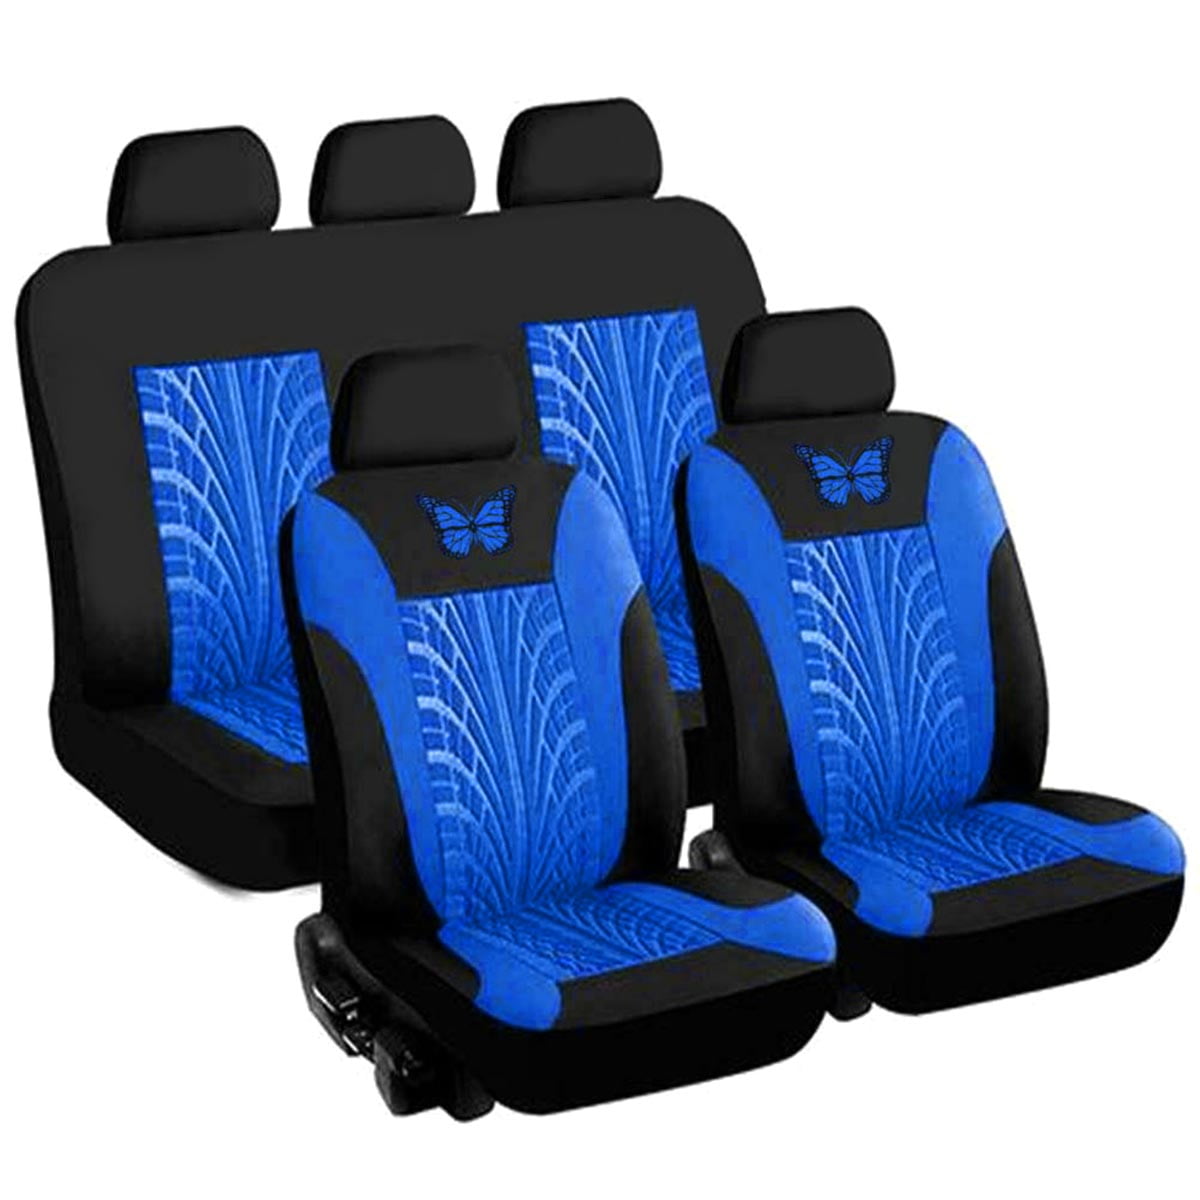 FORD TRANSIT CUSTOM FRONT & REAR CAR SEAT COVER SET BLUE WOVEN FABRIC 